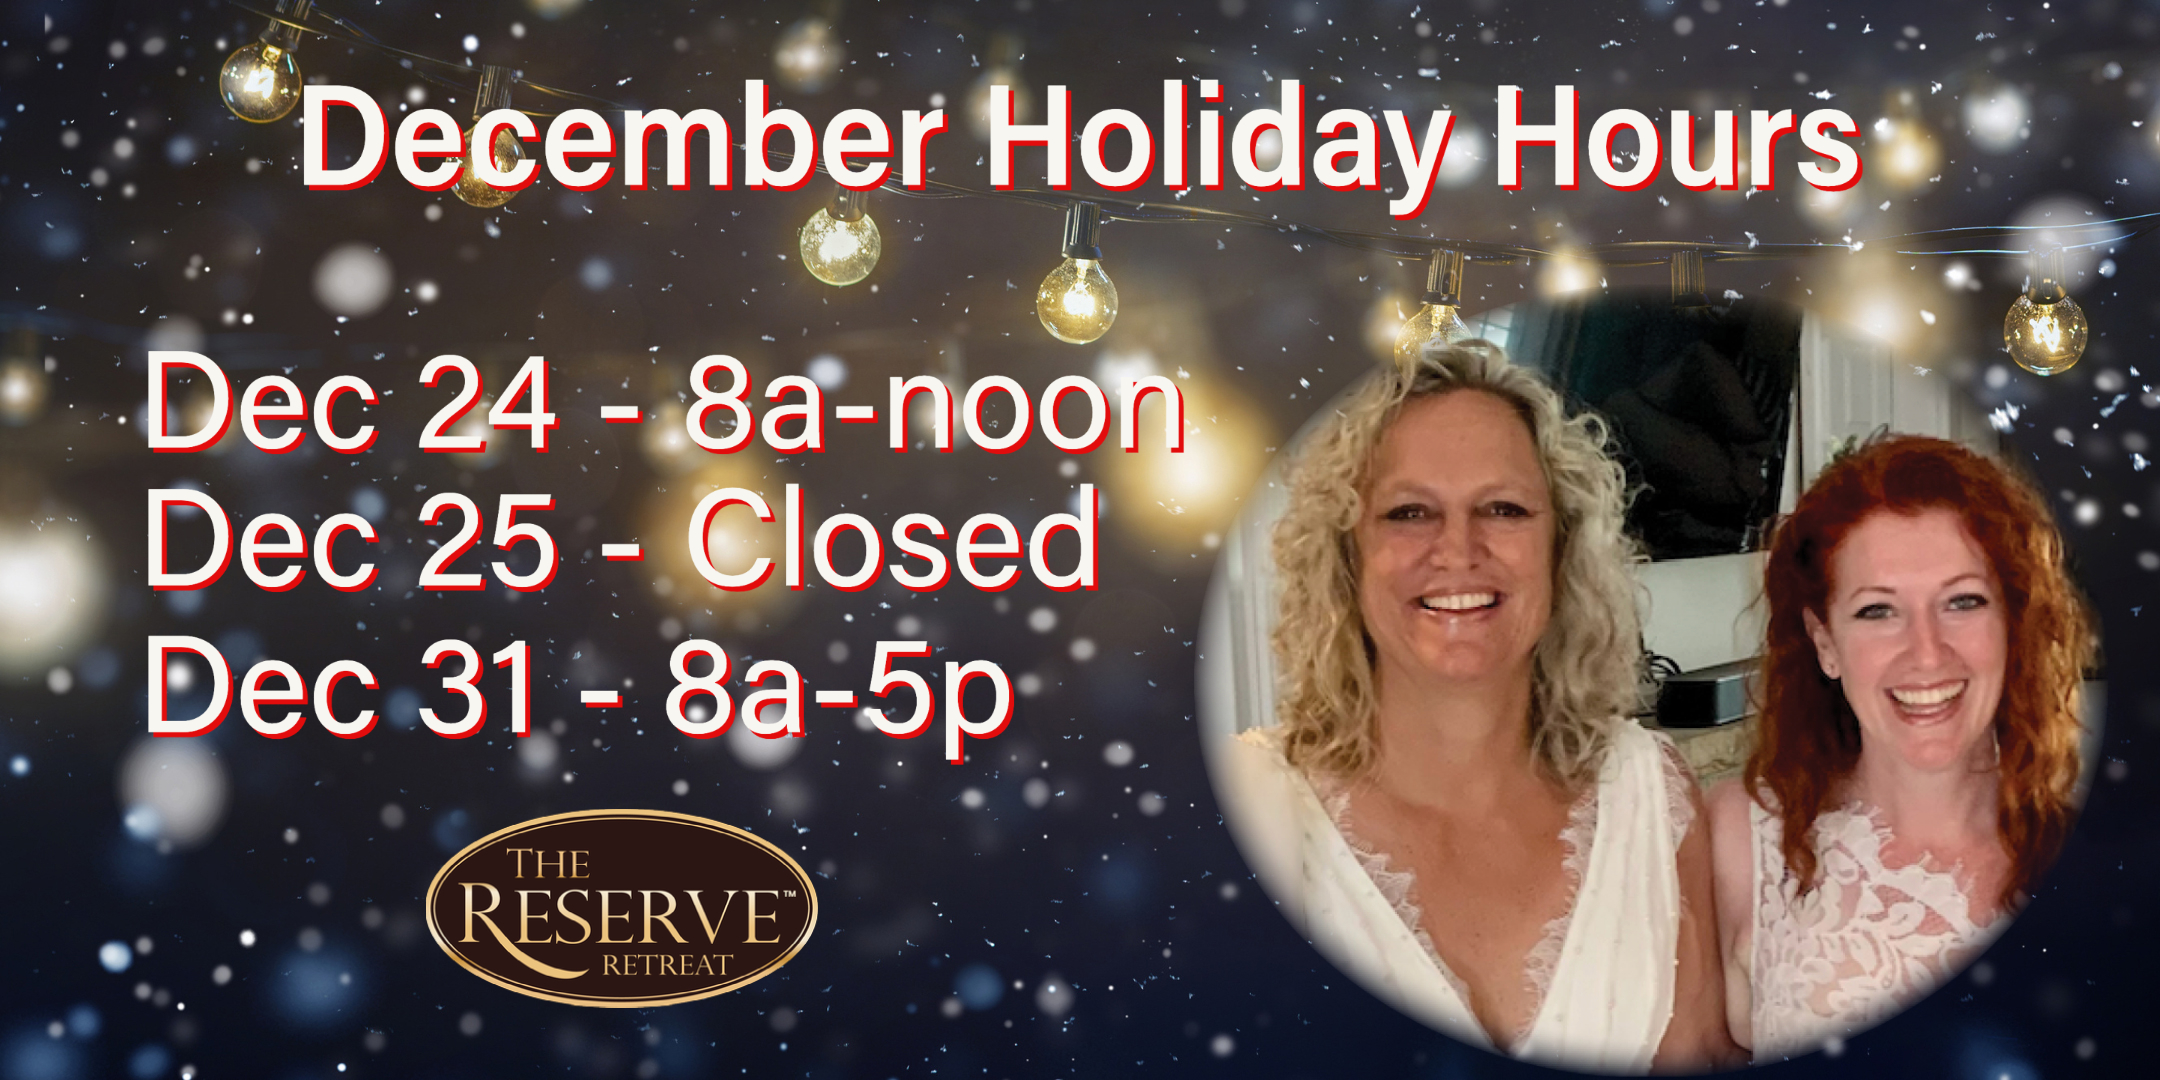 Holiday hours for the Reserve Retreat.